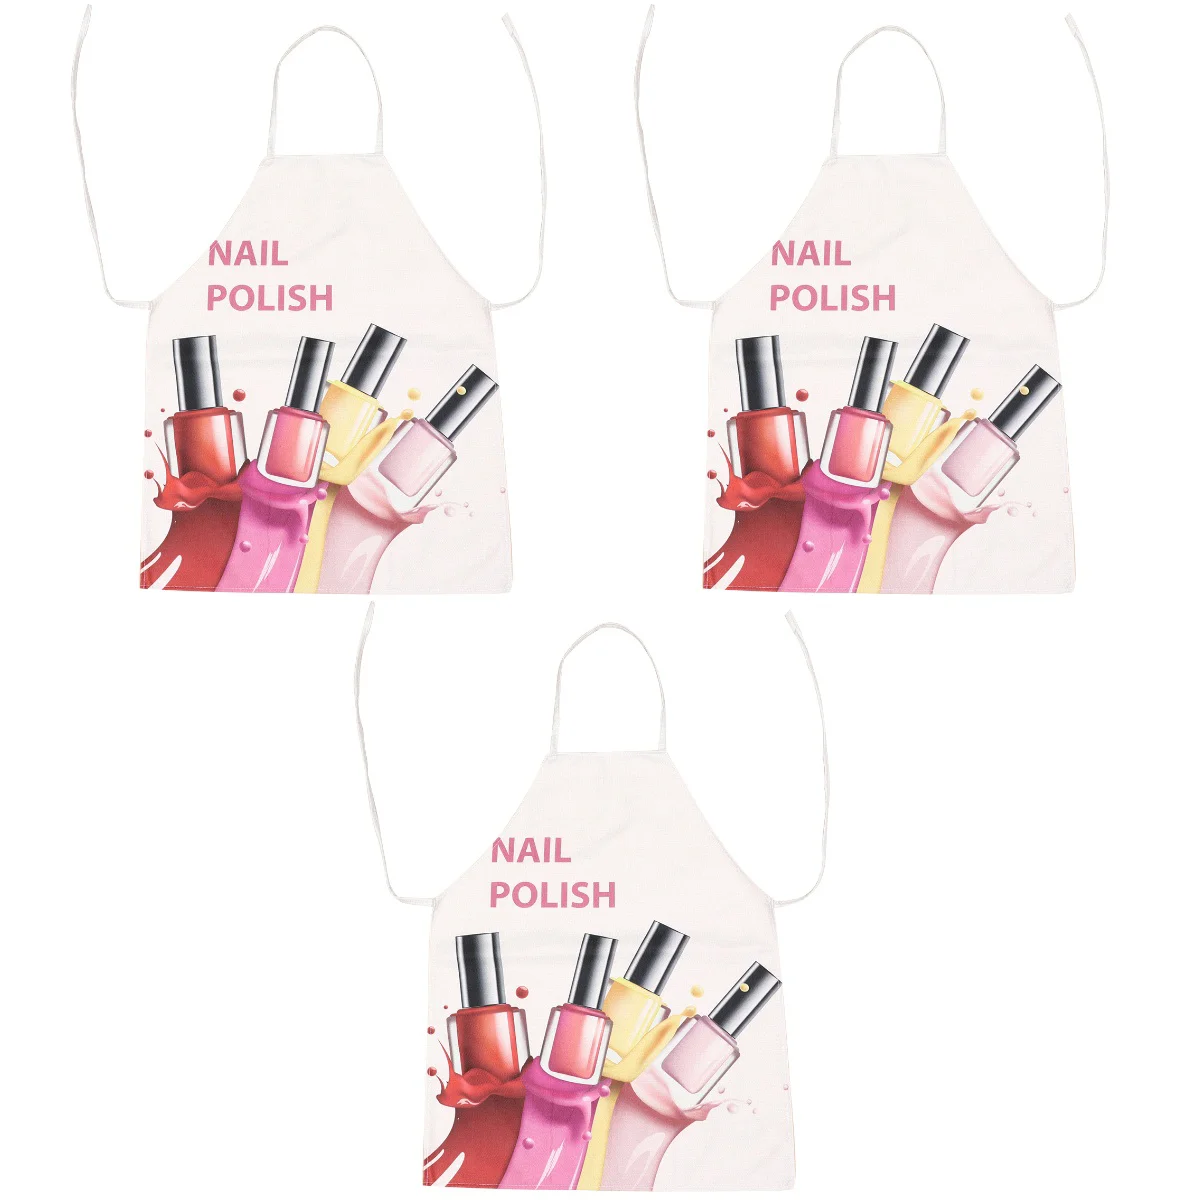 

Apron Aprons Cotton Nail Bakingwomen Isolation Housewife Housework Men Grilling Funny Smock Polish Gown Barber Bib Stylist Hair